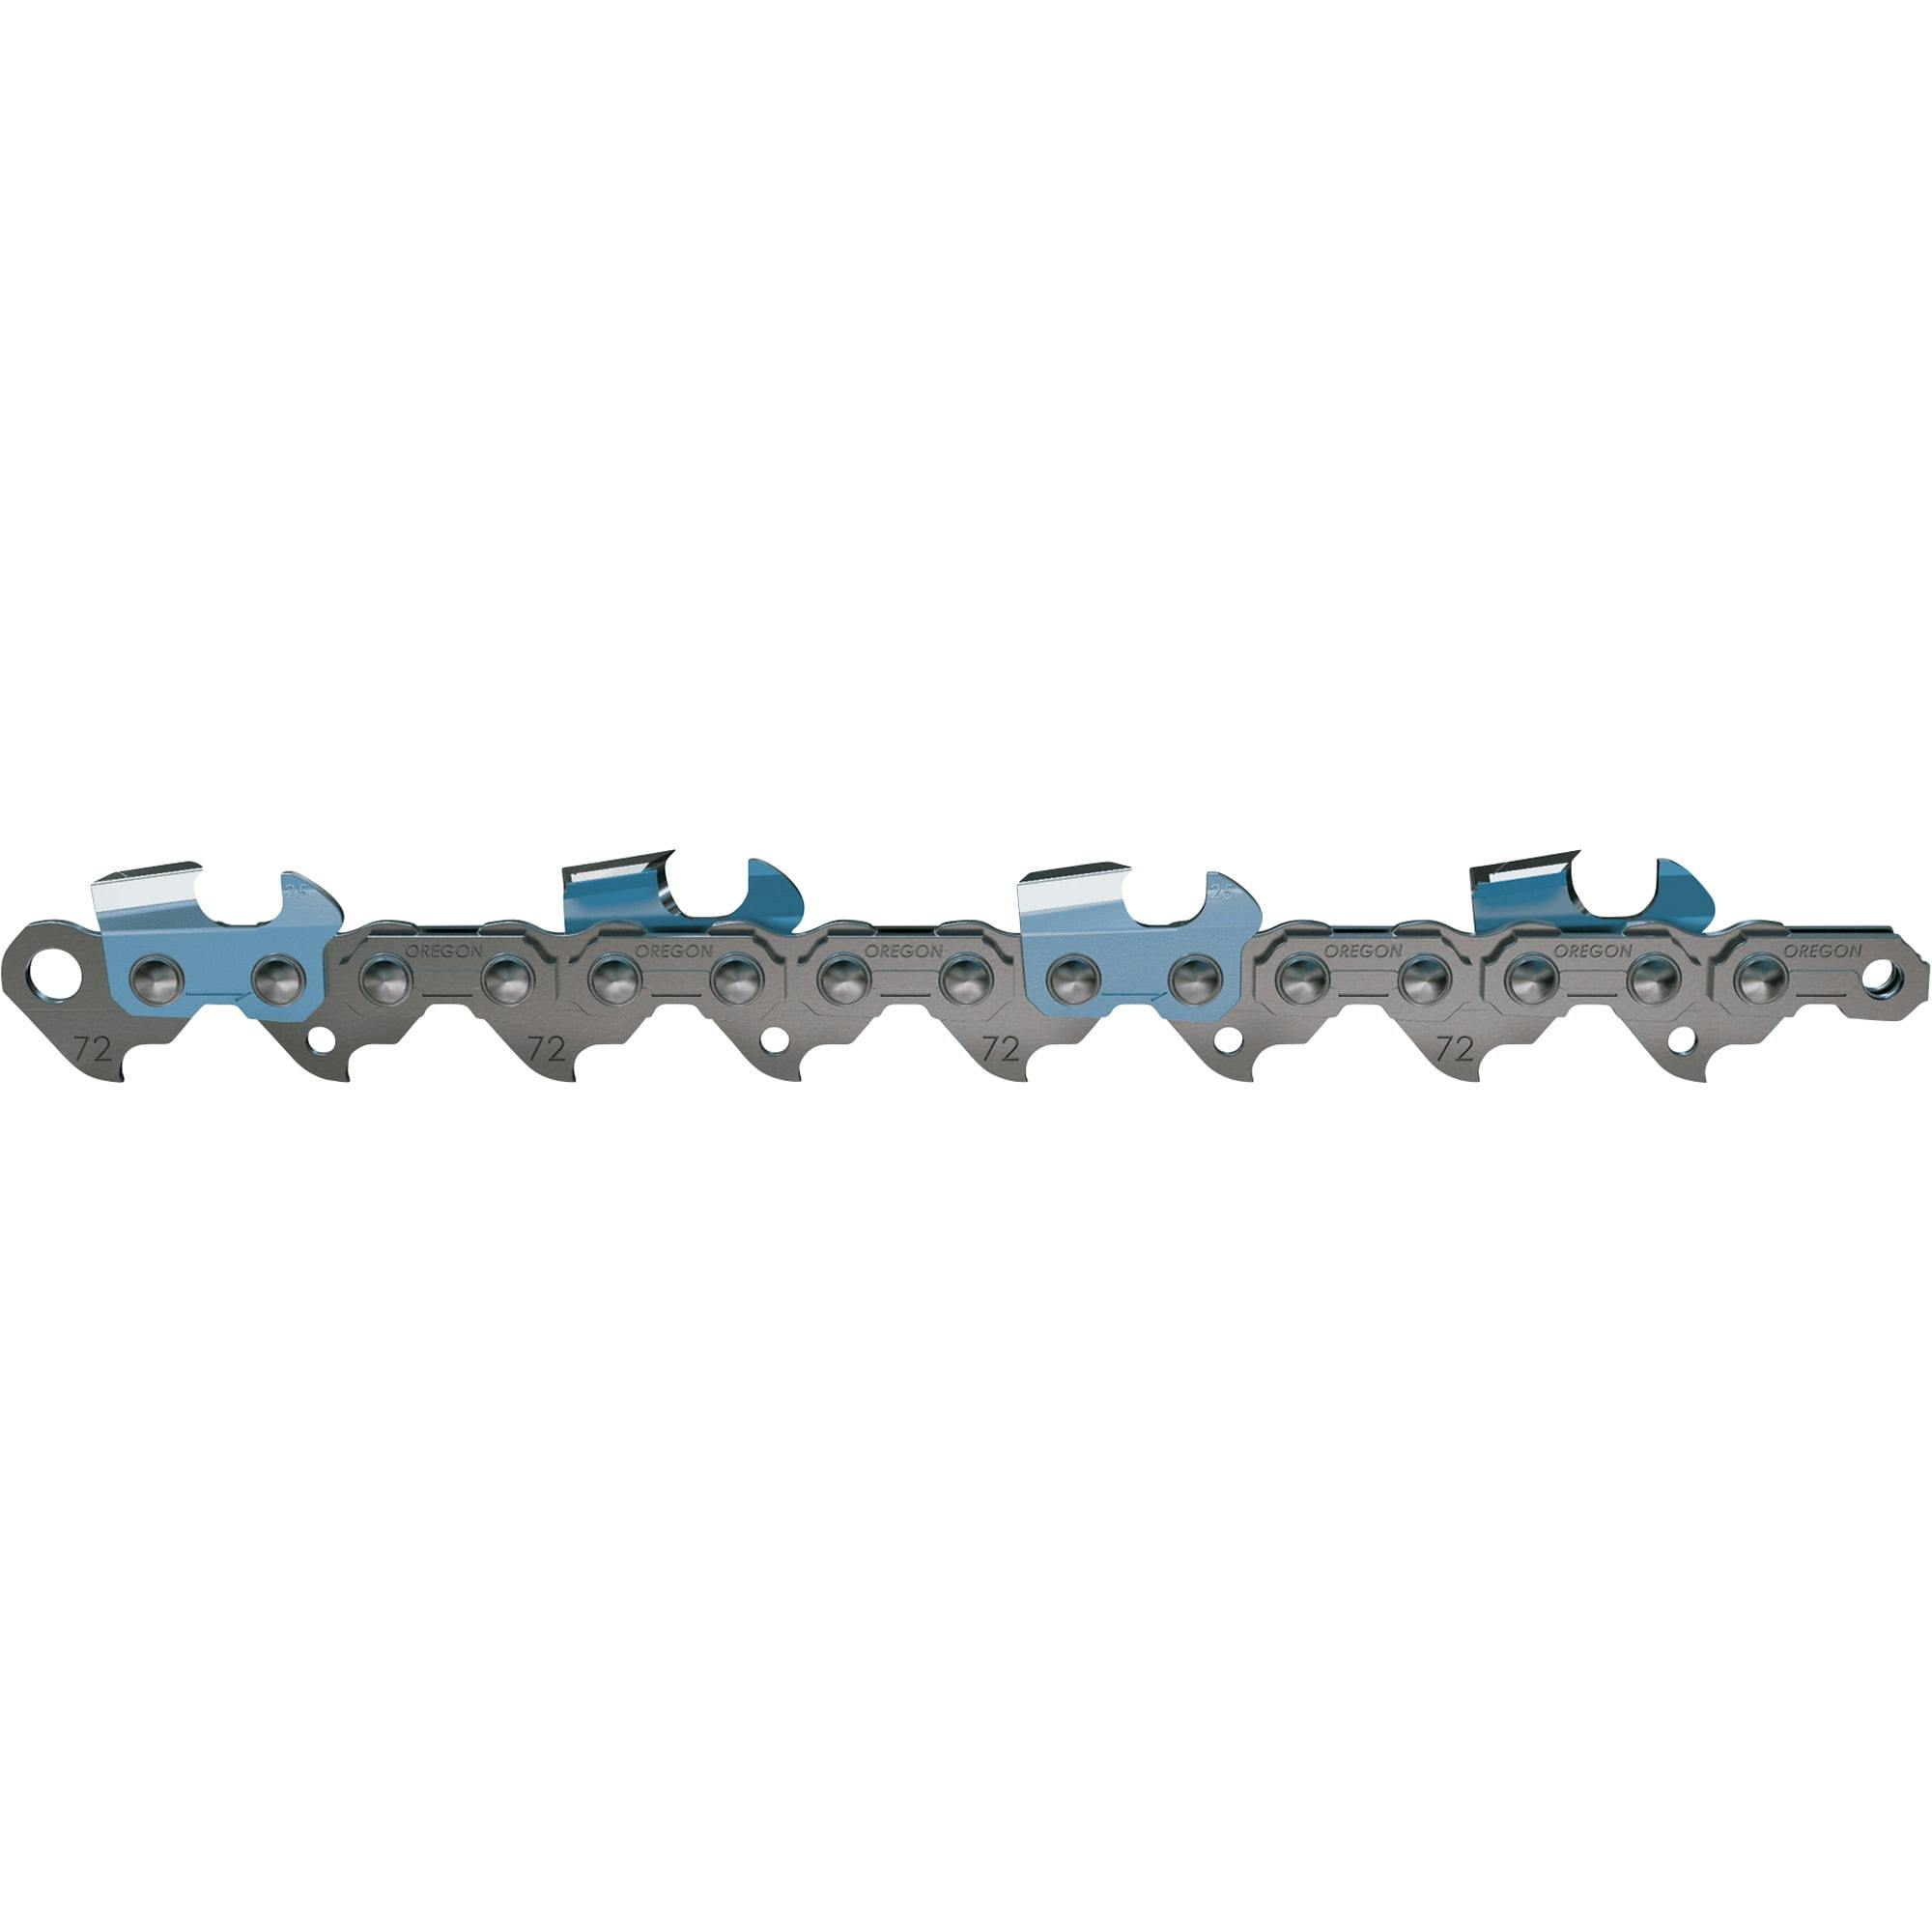 PowerCut 20" Chainsaw Chain 3/8" Pitch 0.050" Gauge with Full Chisel Cutters